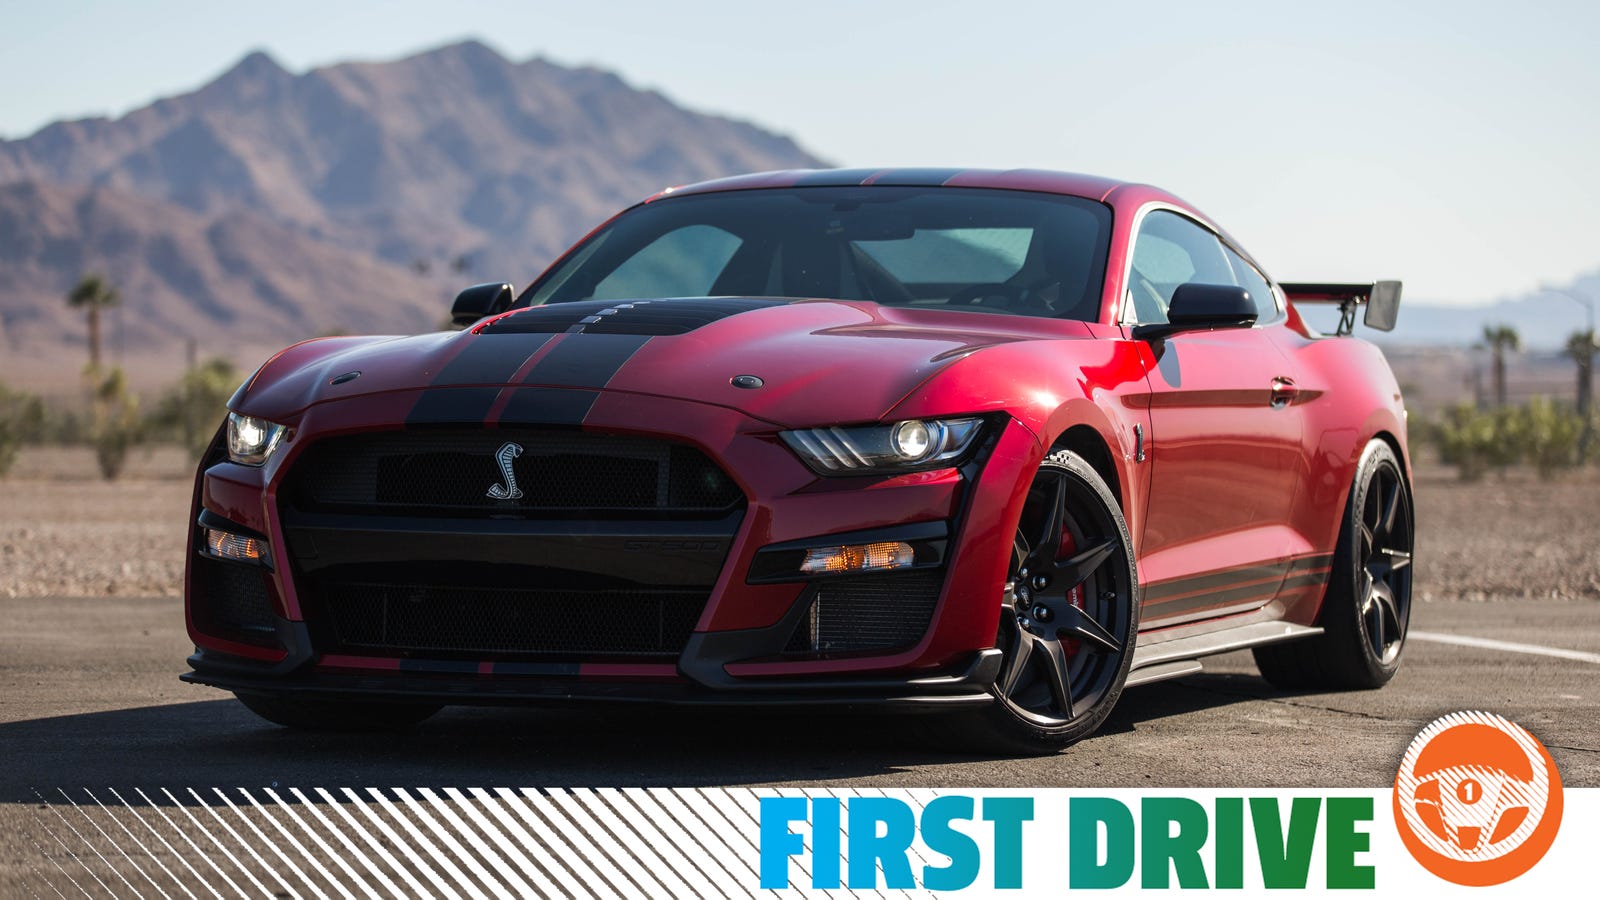 The 2020 Ford Mustang Shelby Gt500 Is A Preposterous 760 Hp